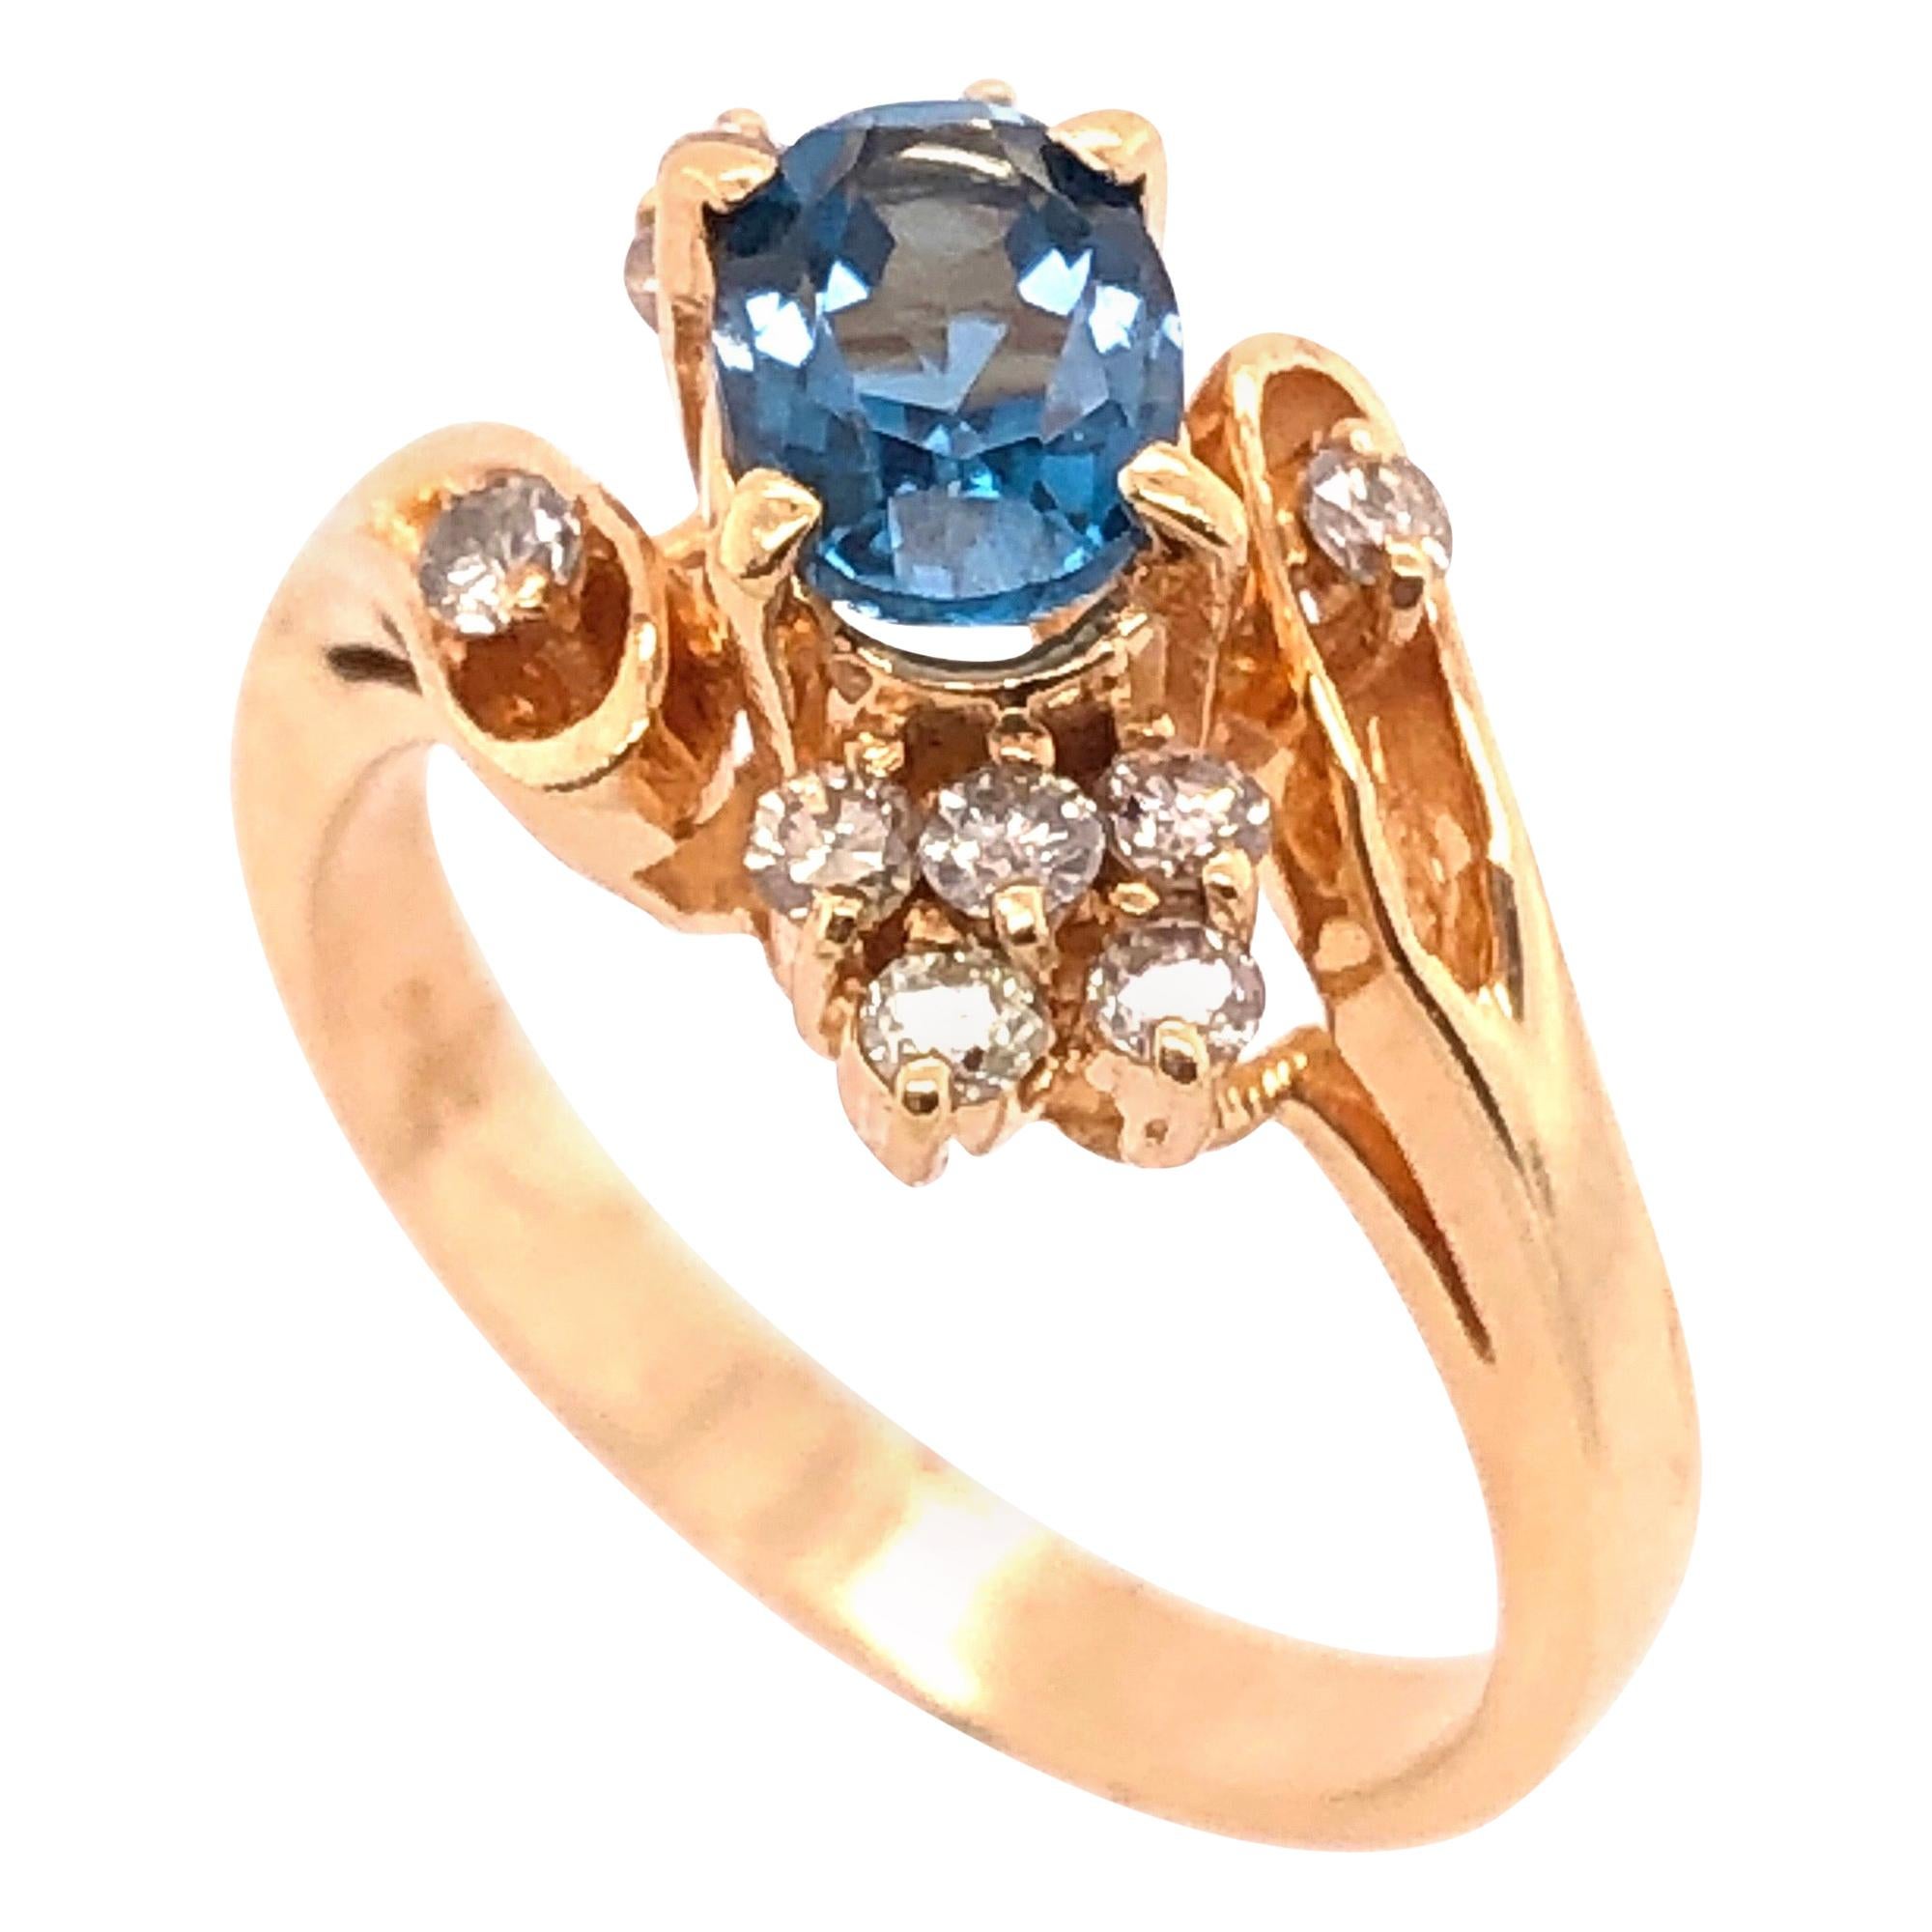 14 Karat Yellow Gold Blue Emerald Ring with Diamond Accents 50.00 TDW